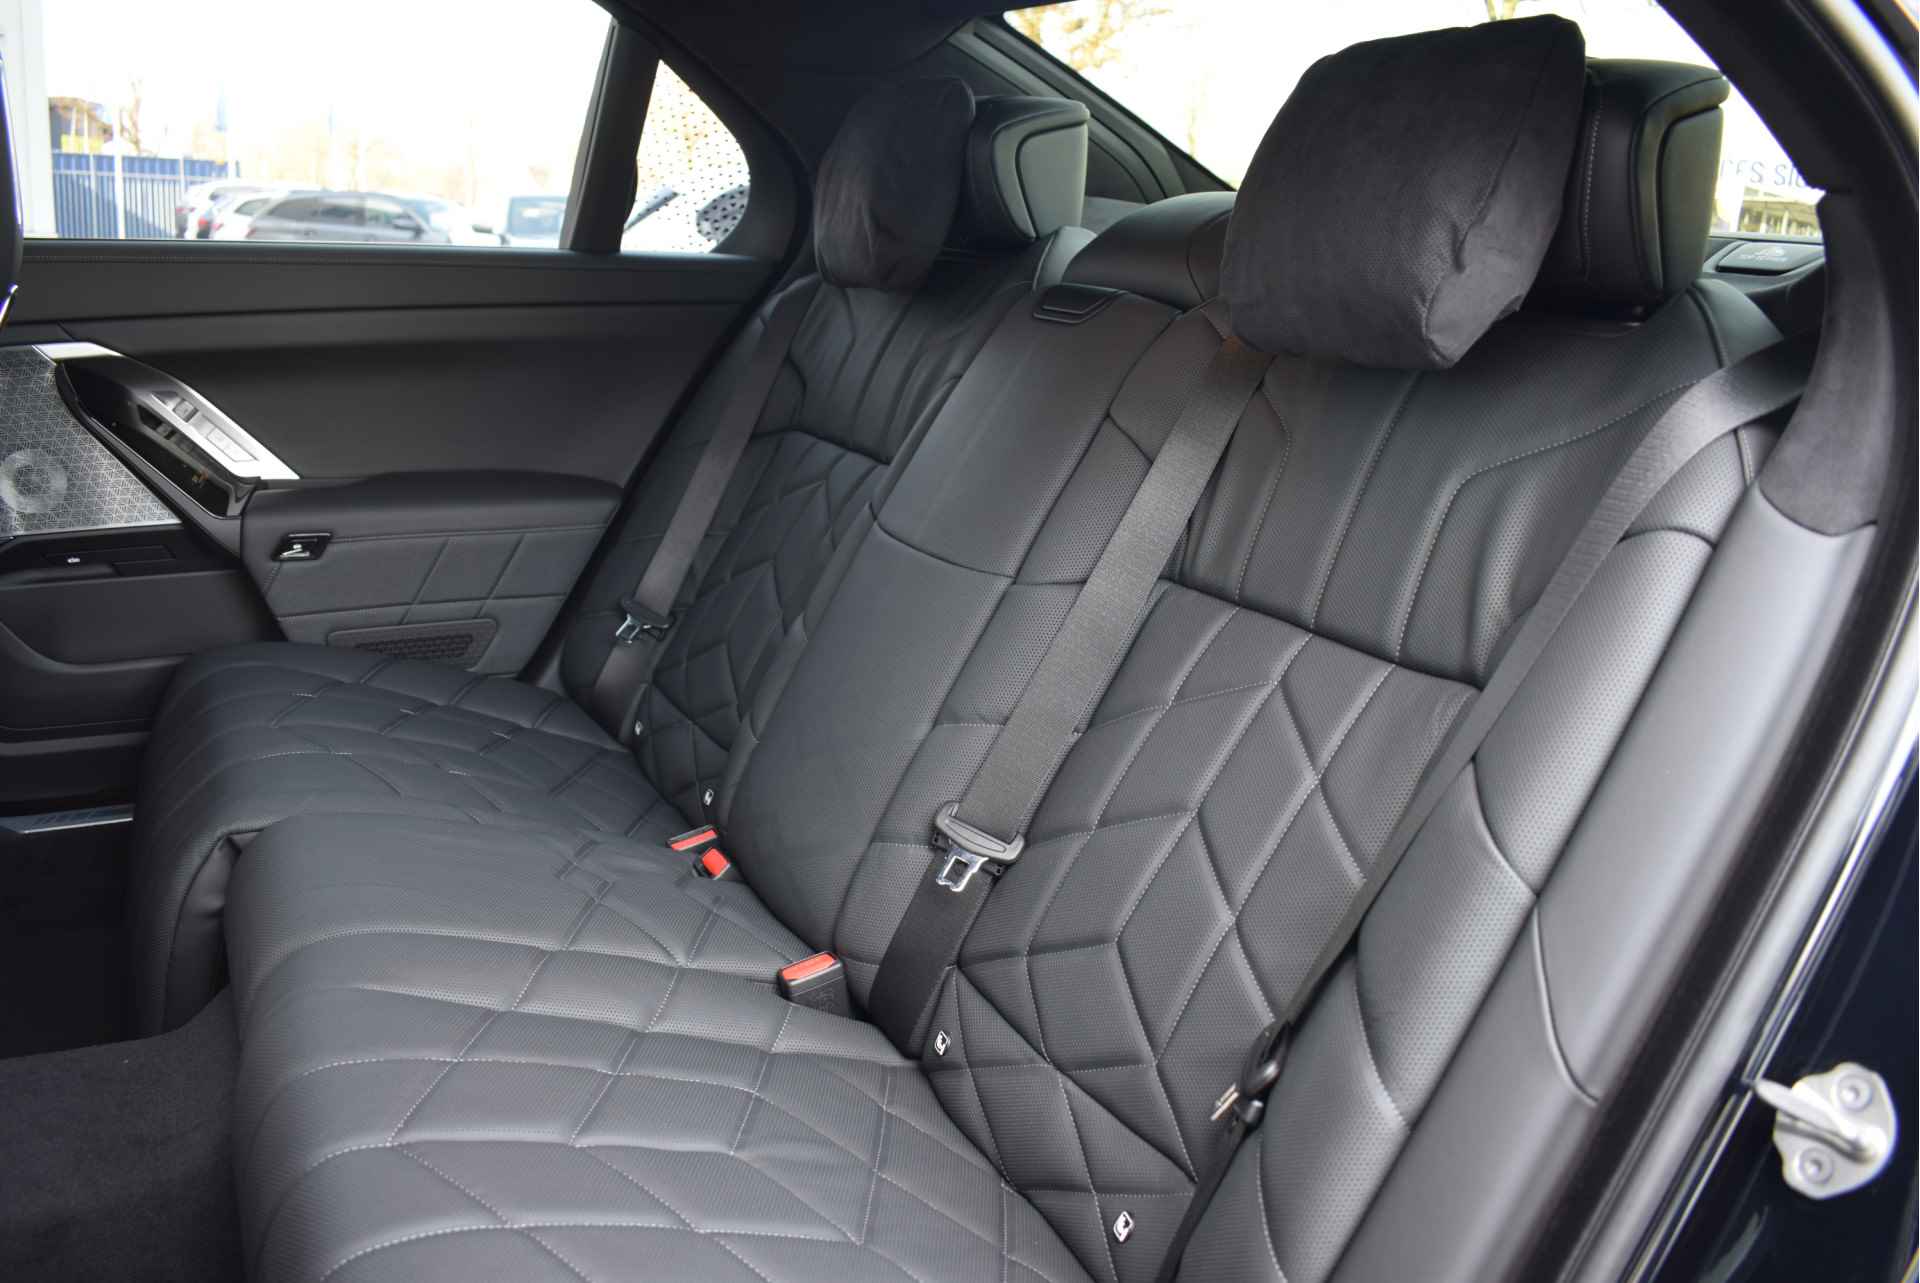 BMW 7 Serie 750e xDrive High Executive M Sport Automaat / Panoramadak Sky Lounge / Trekhaak / Bowers & Wilkins / Parking Assistant Professional / Active Steering / Executive Lounge Seating - 6/41